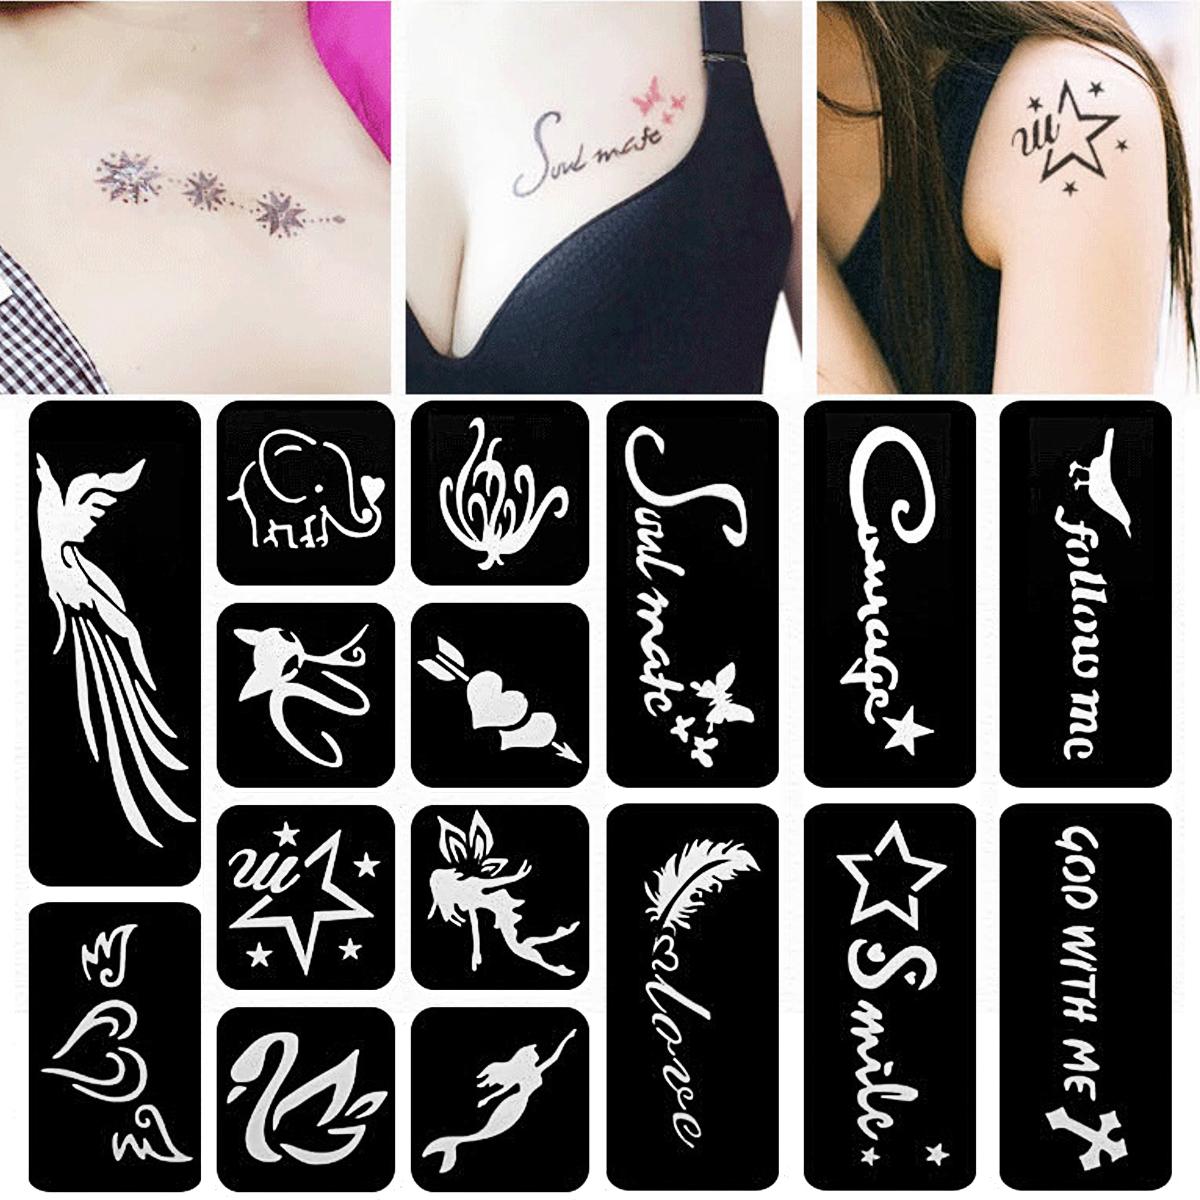 Temporary Tattoo Stencils 118 Patterns Henna Glitter Airbrush Painting Insect Flower Letter Sexy Women Body Art Tattoo Templates